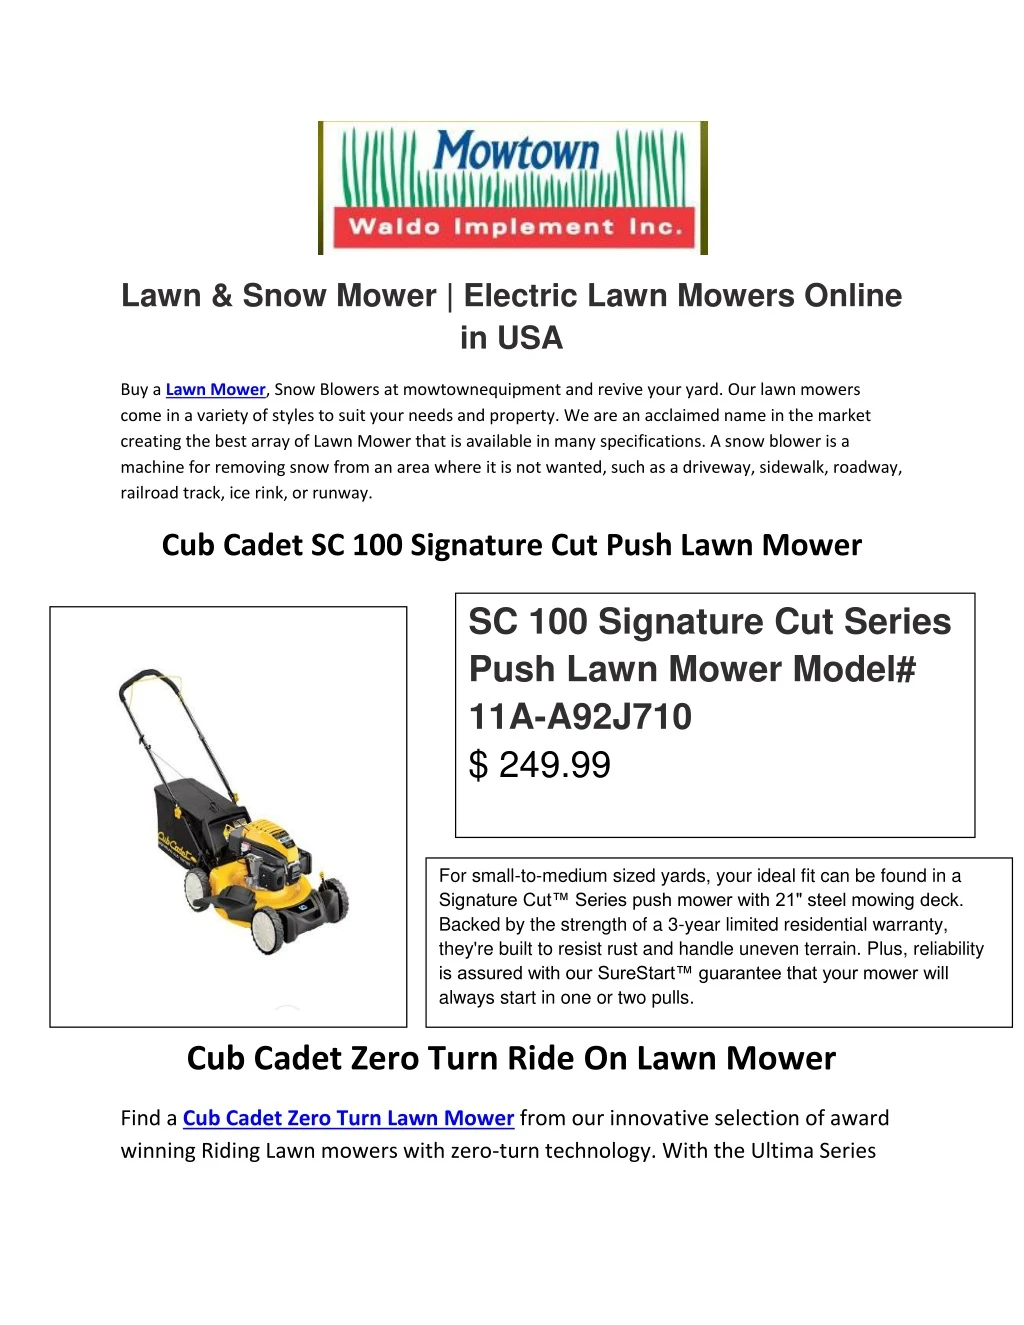 lawn snow mower electric lawn mowers online in usa